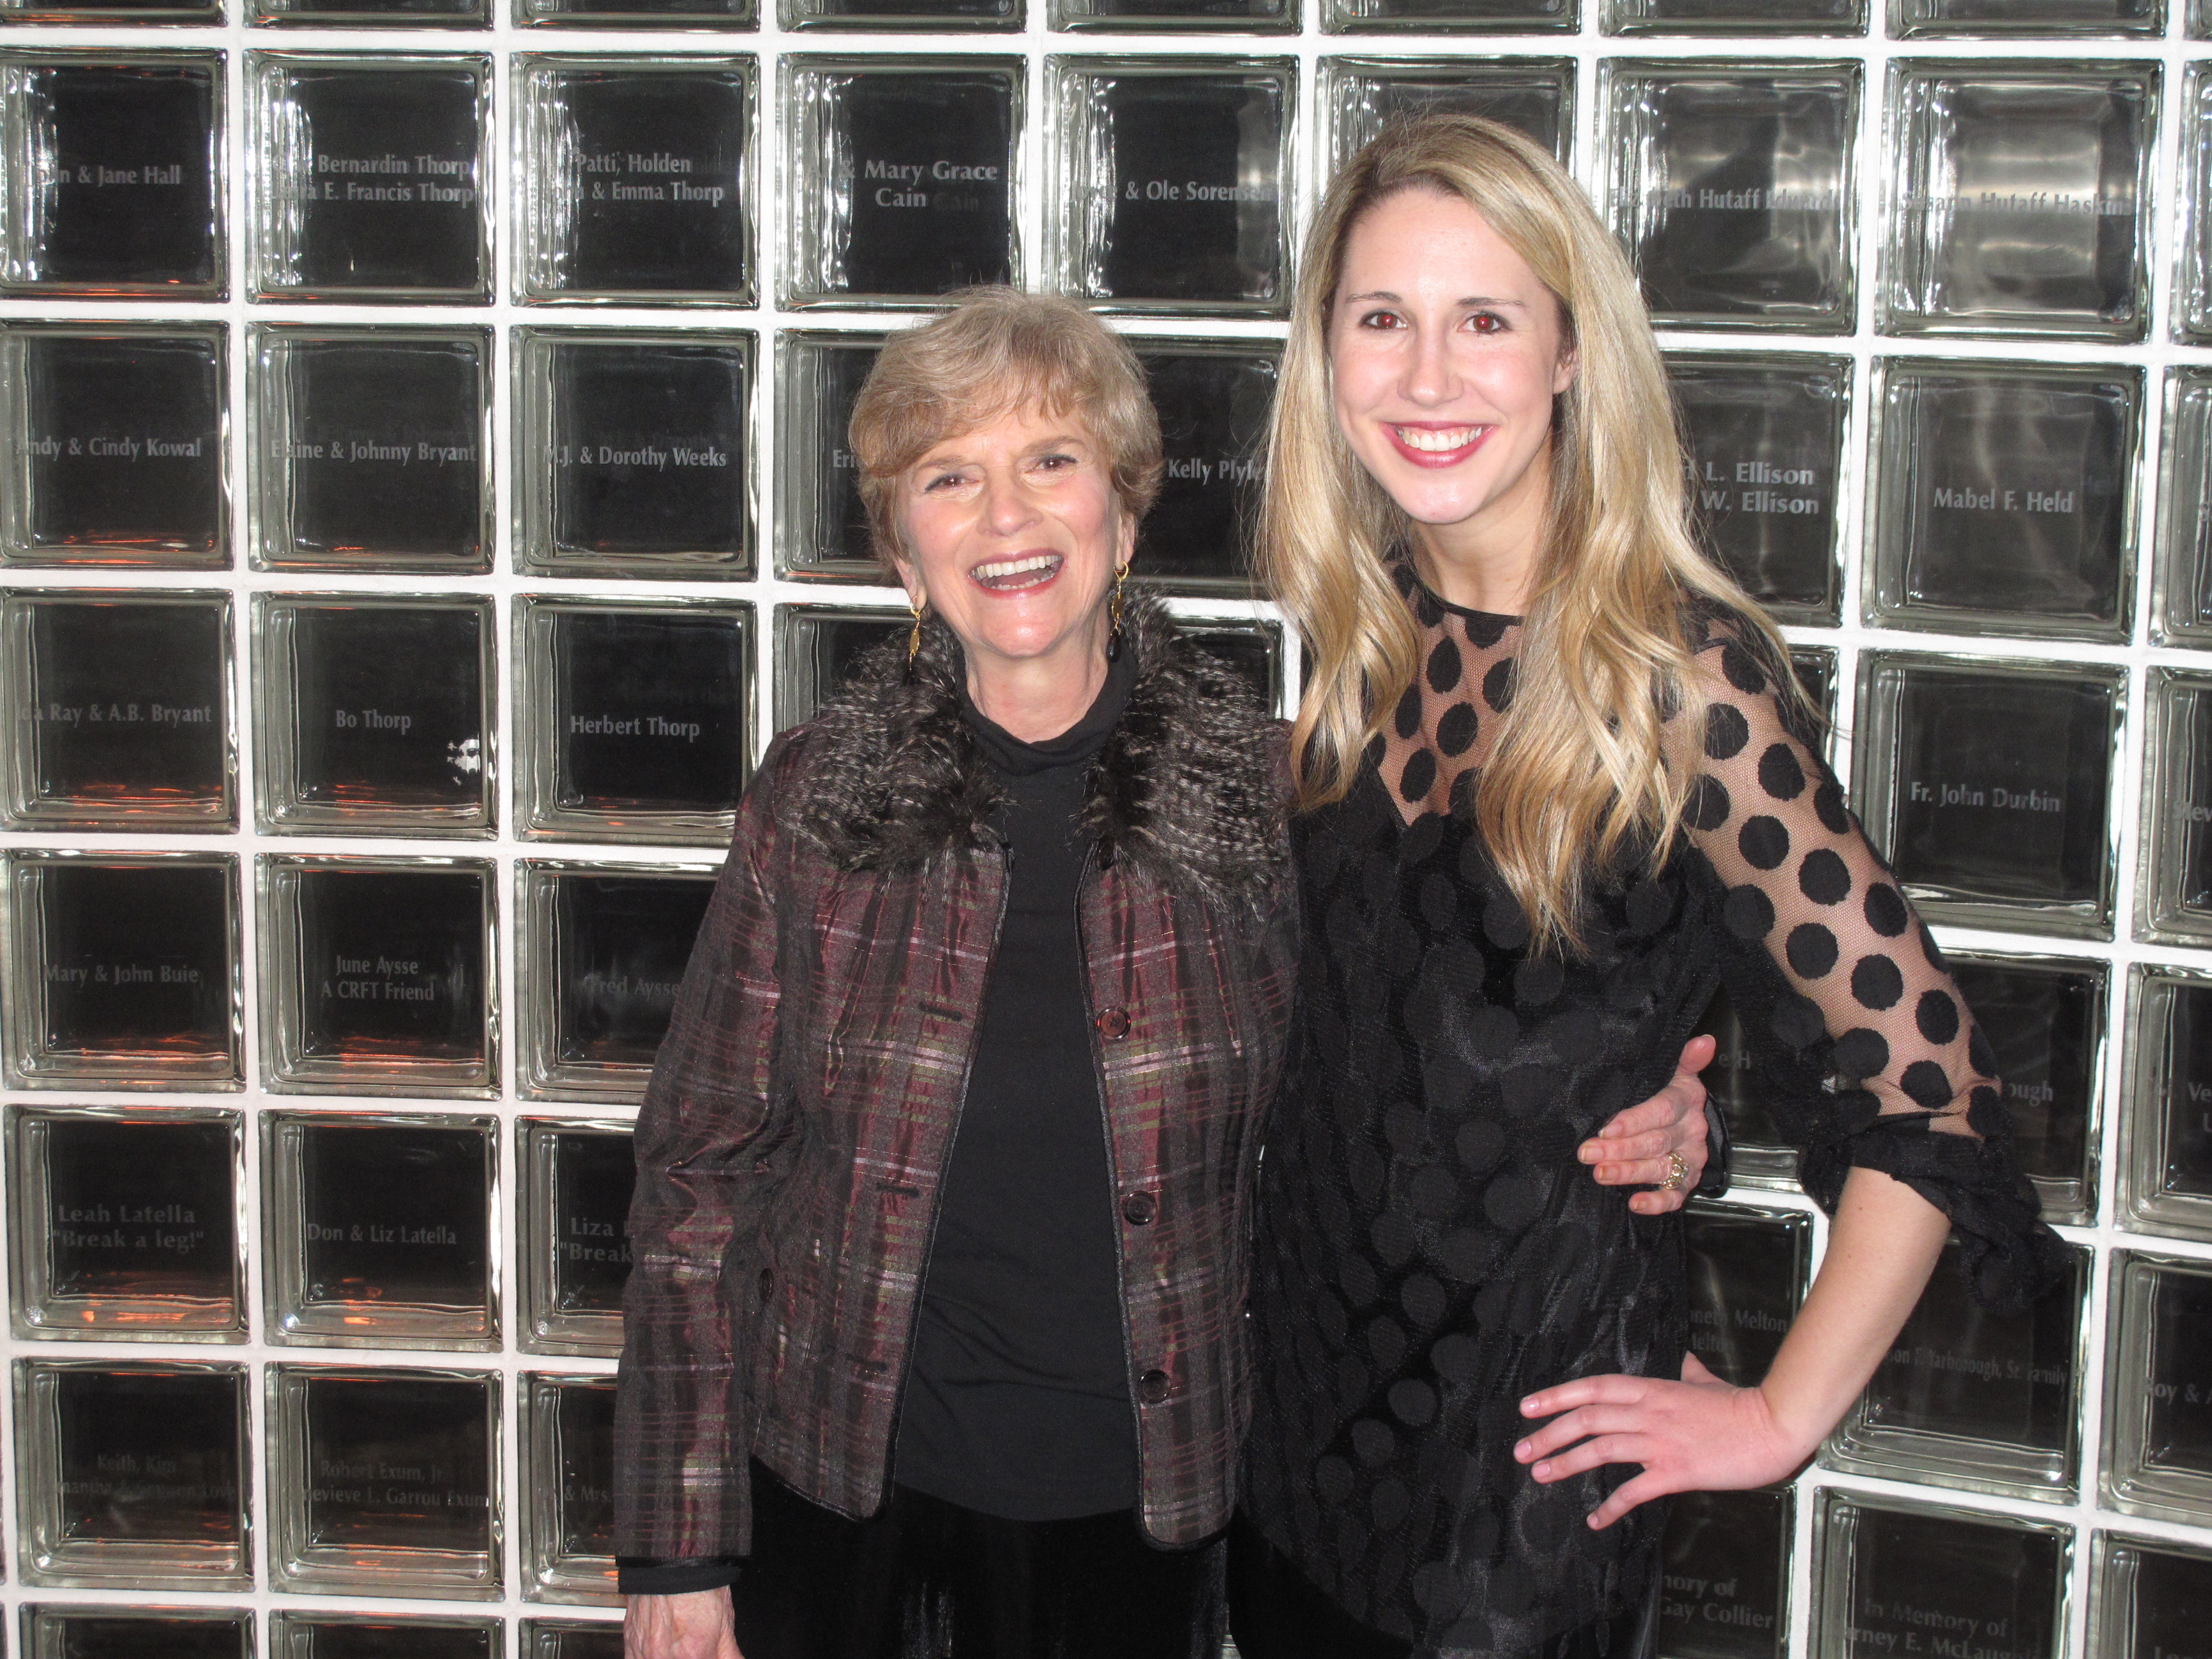 Emily with CFRT Founder and Former Artistic Director, Bo Thorpe